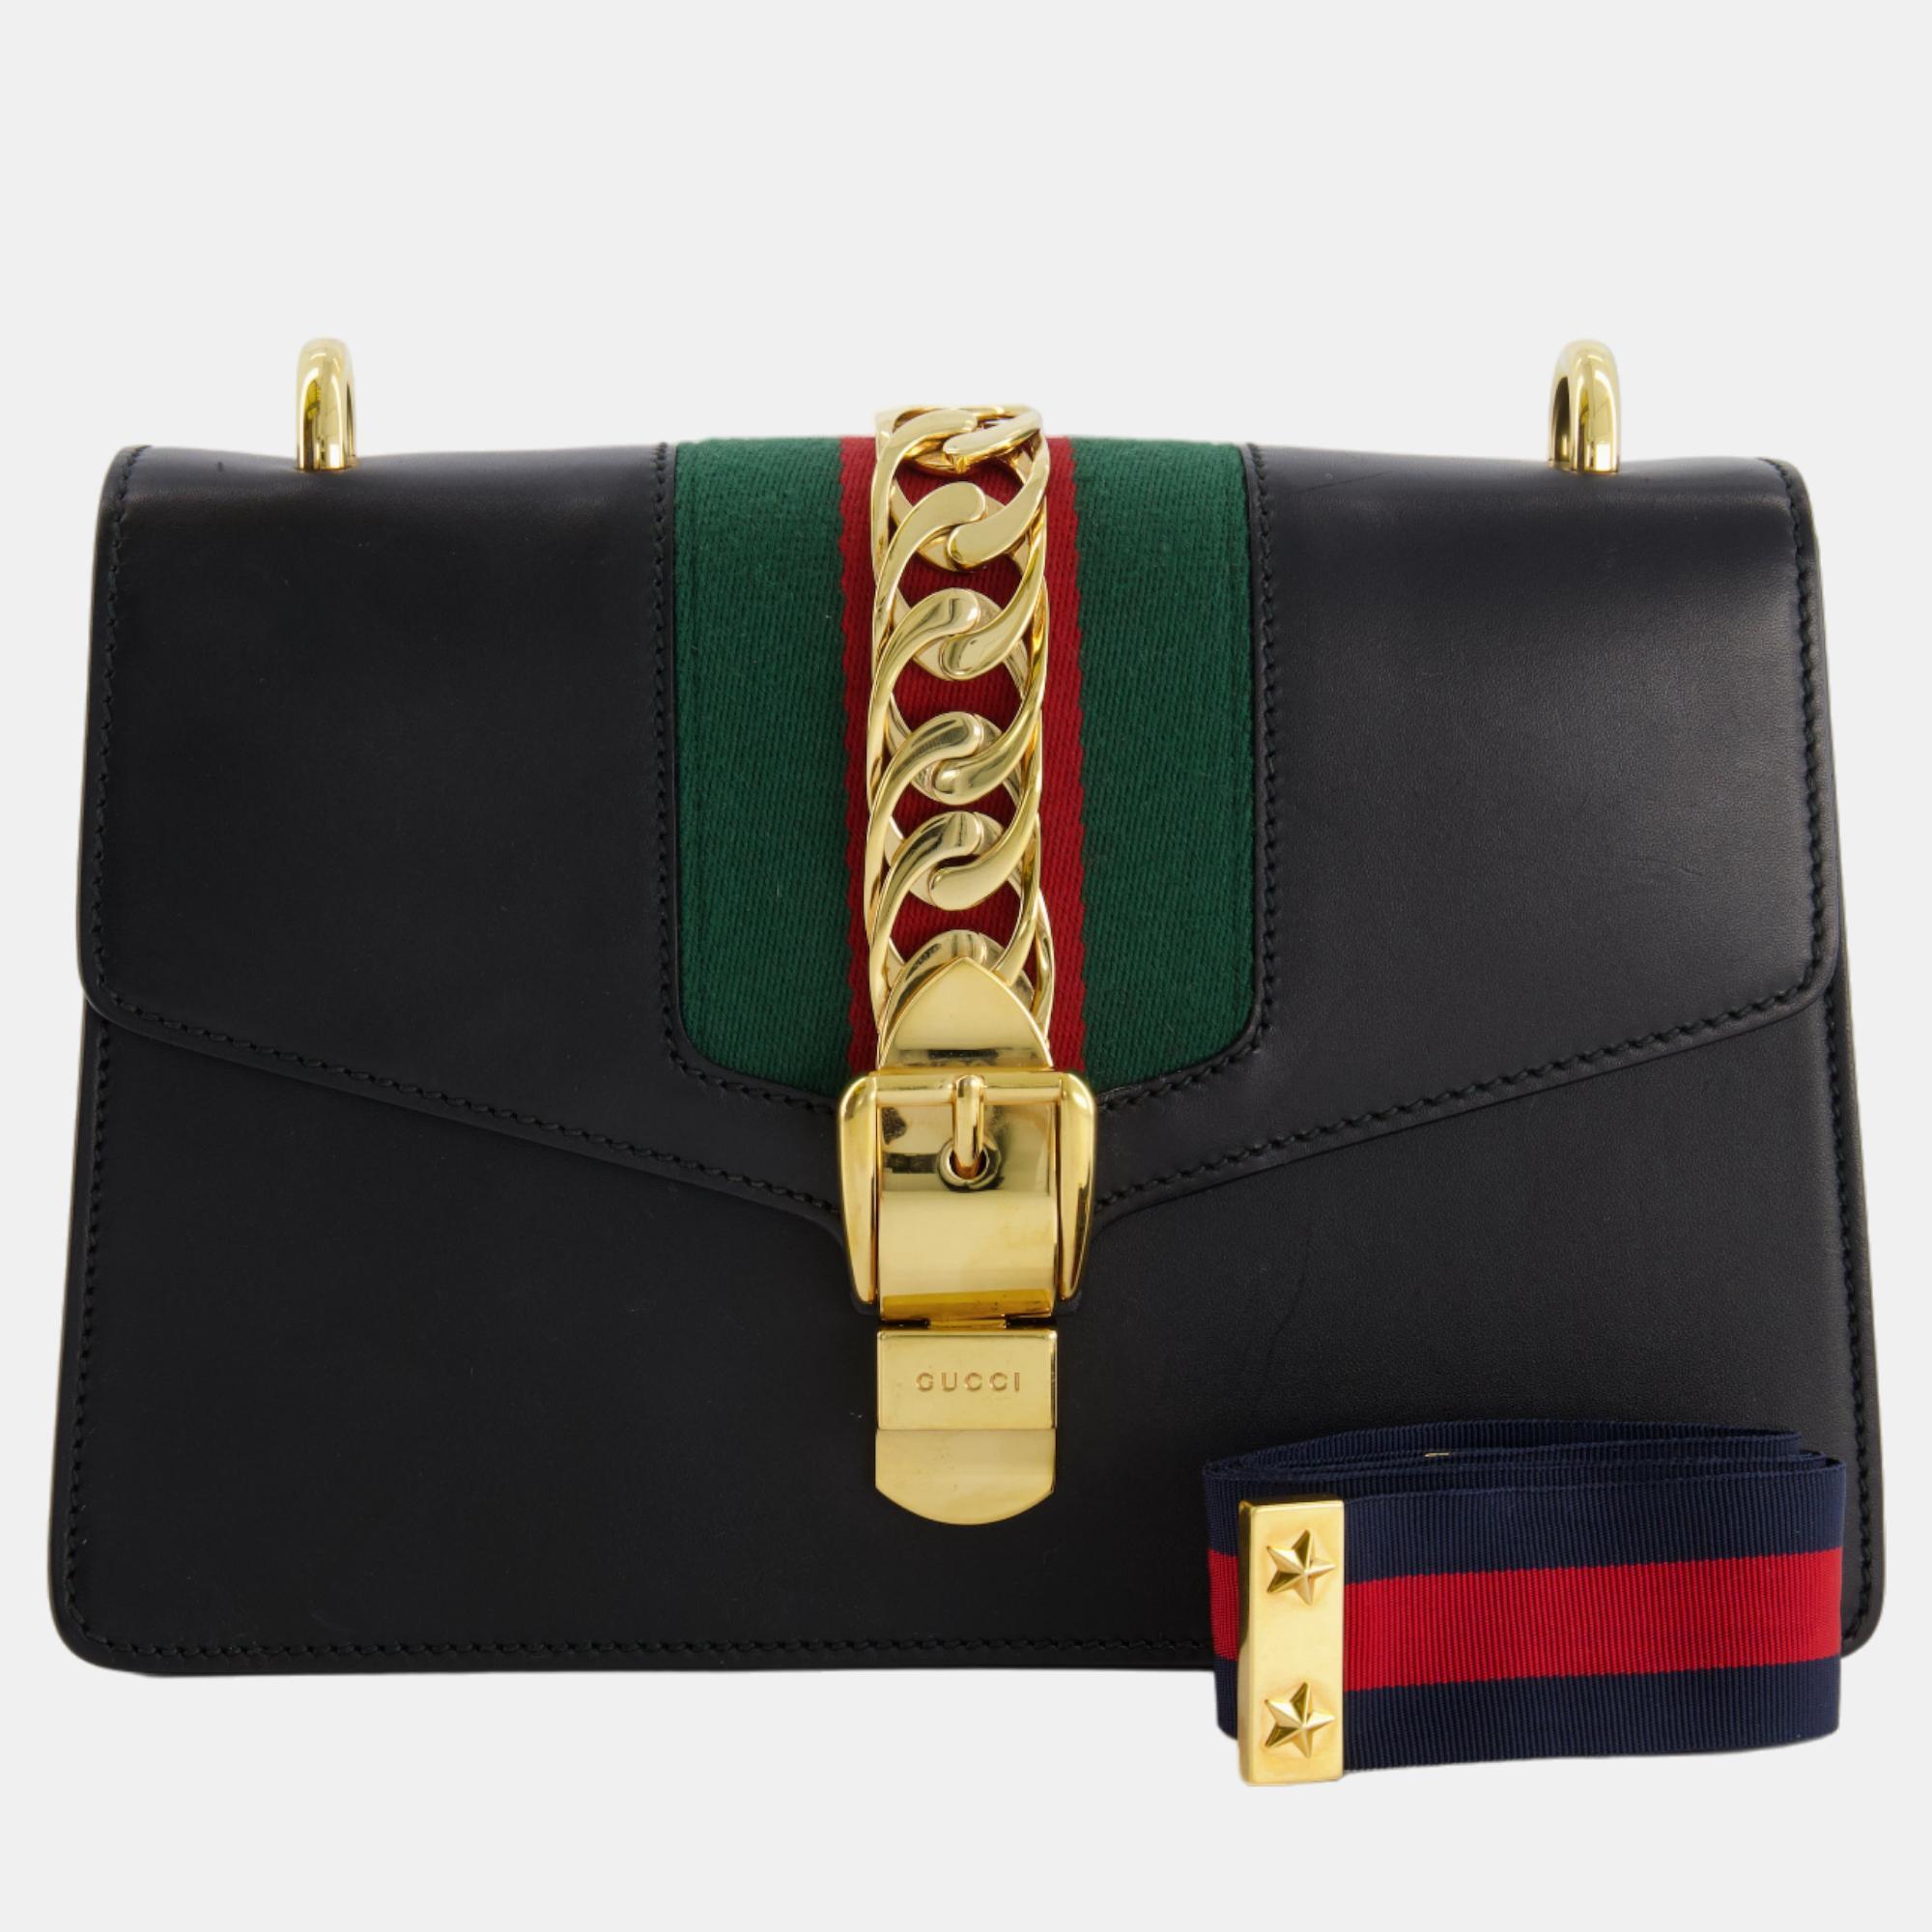 Gucci Black Leather Small Sylvie Bag Canvas With Gold Hardware And Canvas Strap